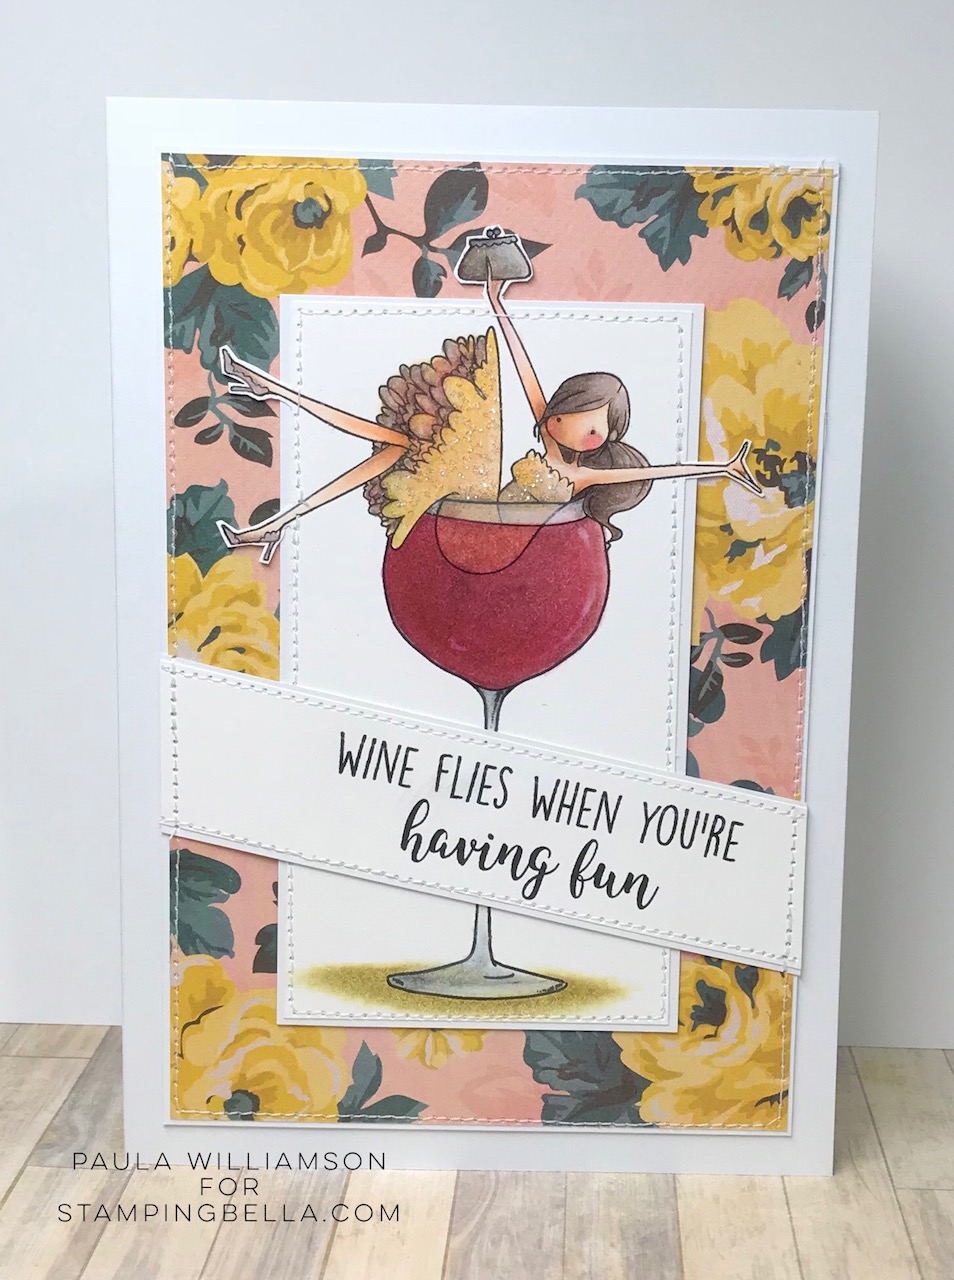 www.stampingbella.com: Rubber stamp UPTOWN GIRL WILMA LOVES WINE. Card by Paula Williamson